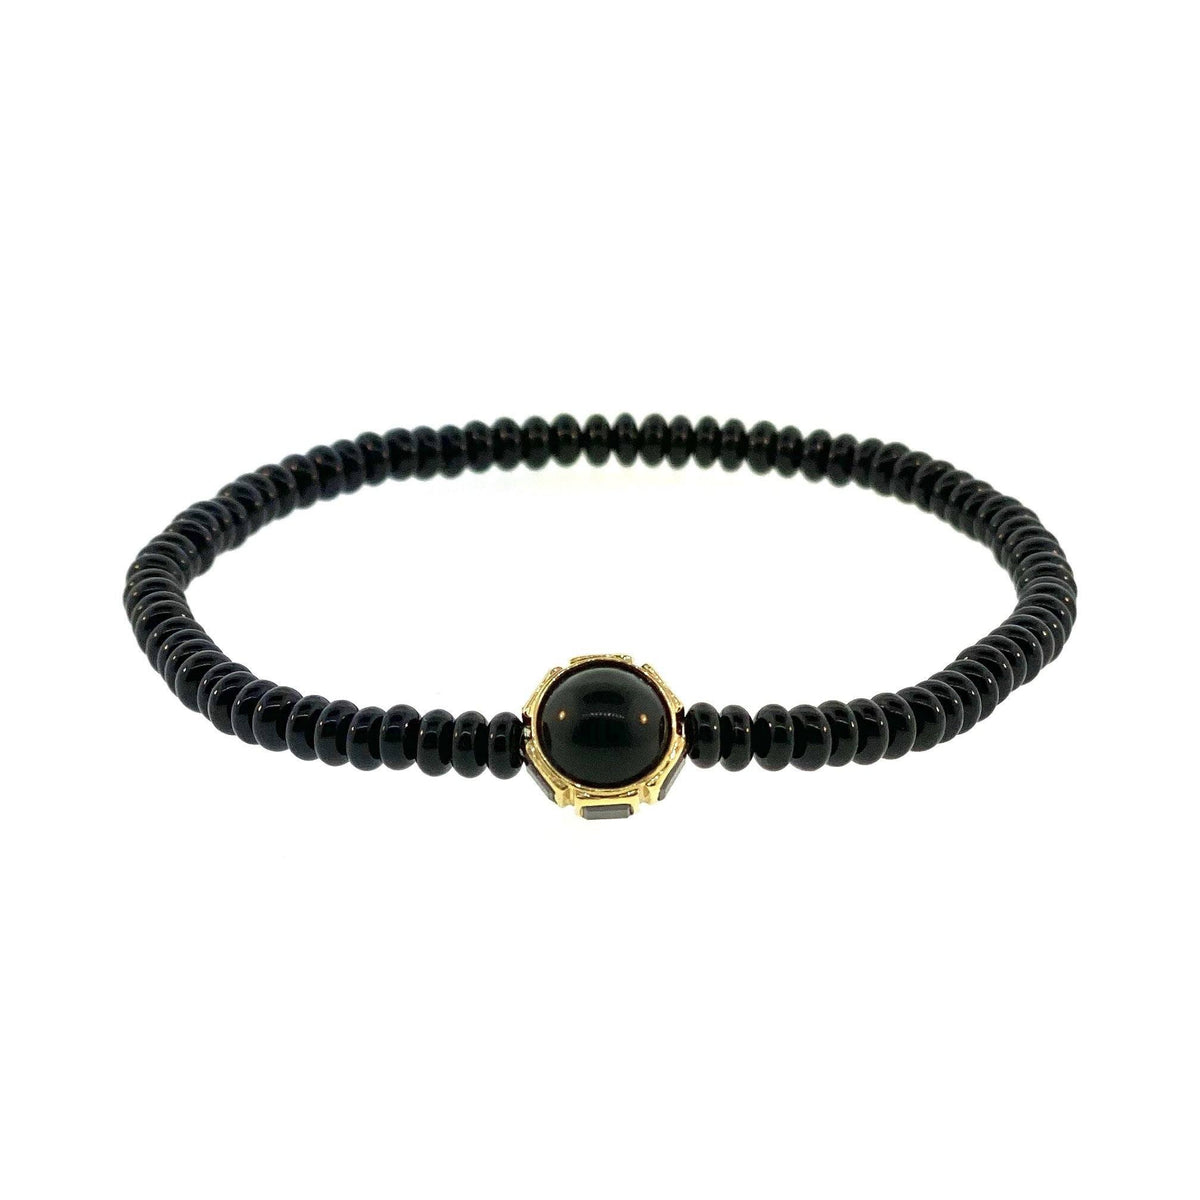 GOLD COLLAR WITH BLACK DIAMOND BAGUETTES, ONYX AND LABRADORITE CABACHONS ON GEMSTONE BEADED Marie France Van Damme Women's 6.5 